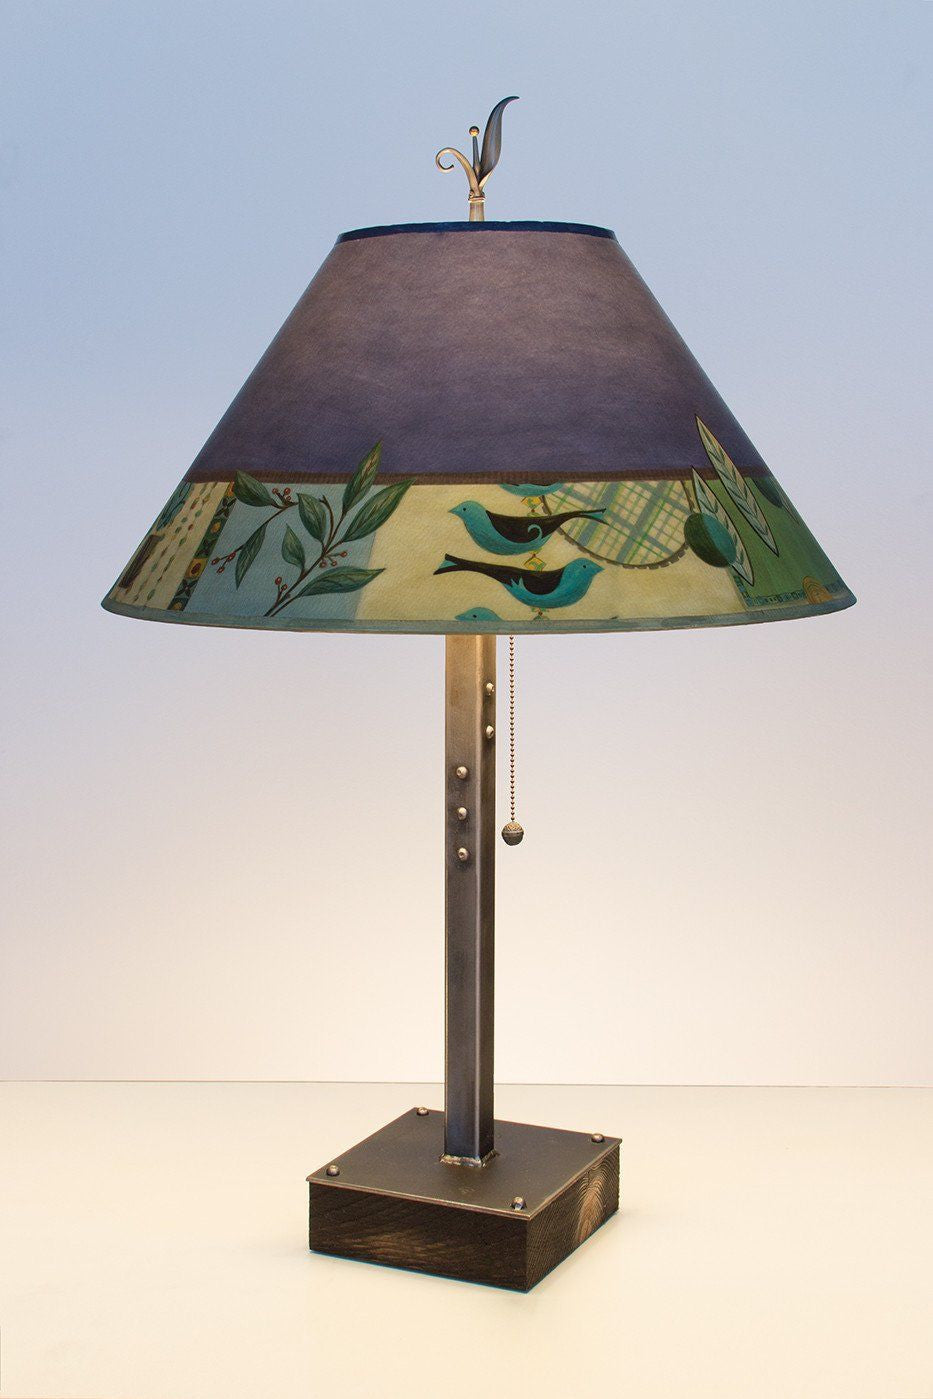 Janna Ugone & Co Table Lamps Steel Table Lamp on Wood with Large Conical Shade in New Capri Periwinkle